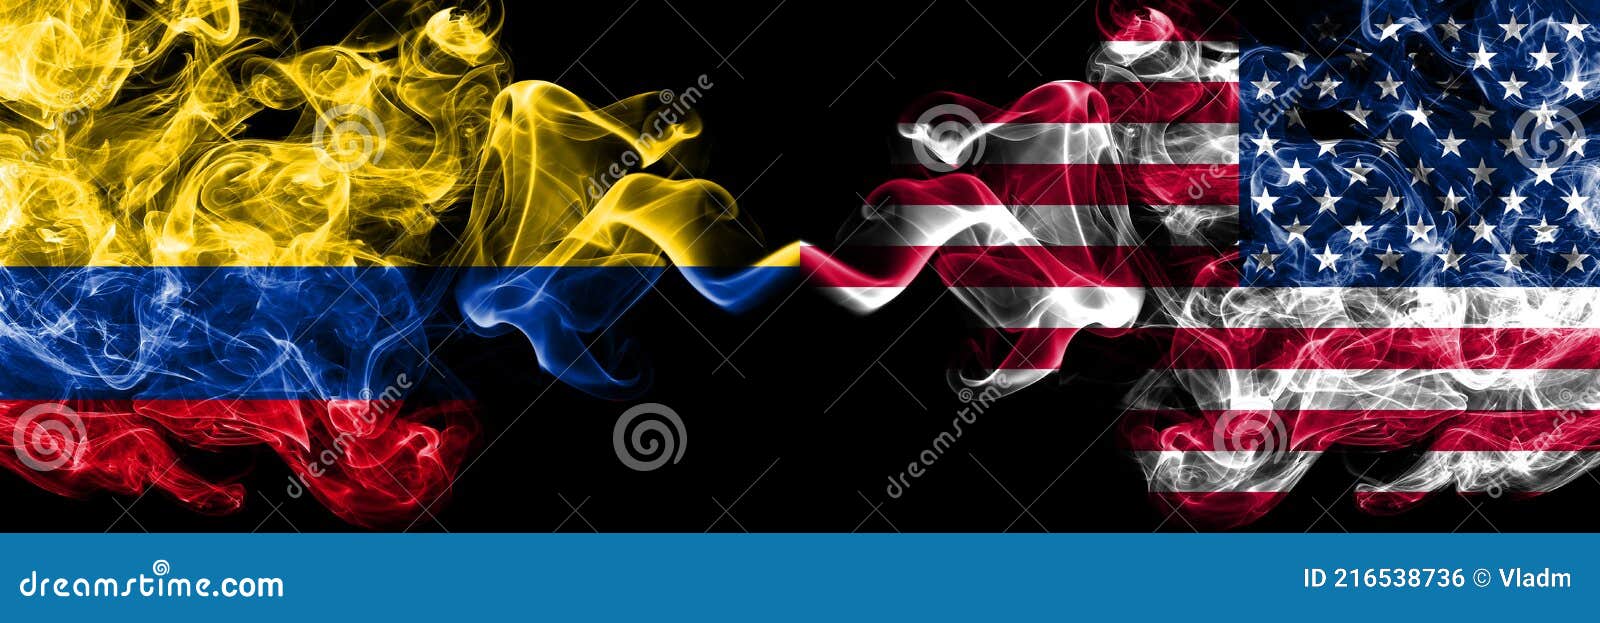 colombia, colombian vs united states of america, america, us, usa, american smoky mystic flags placed side by side. thick colored